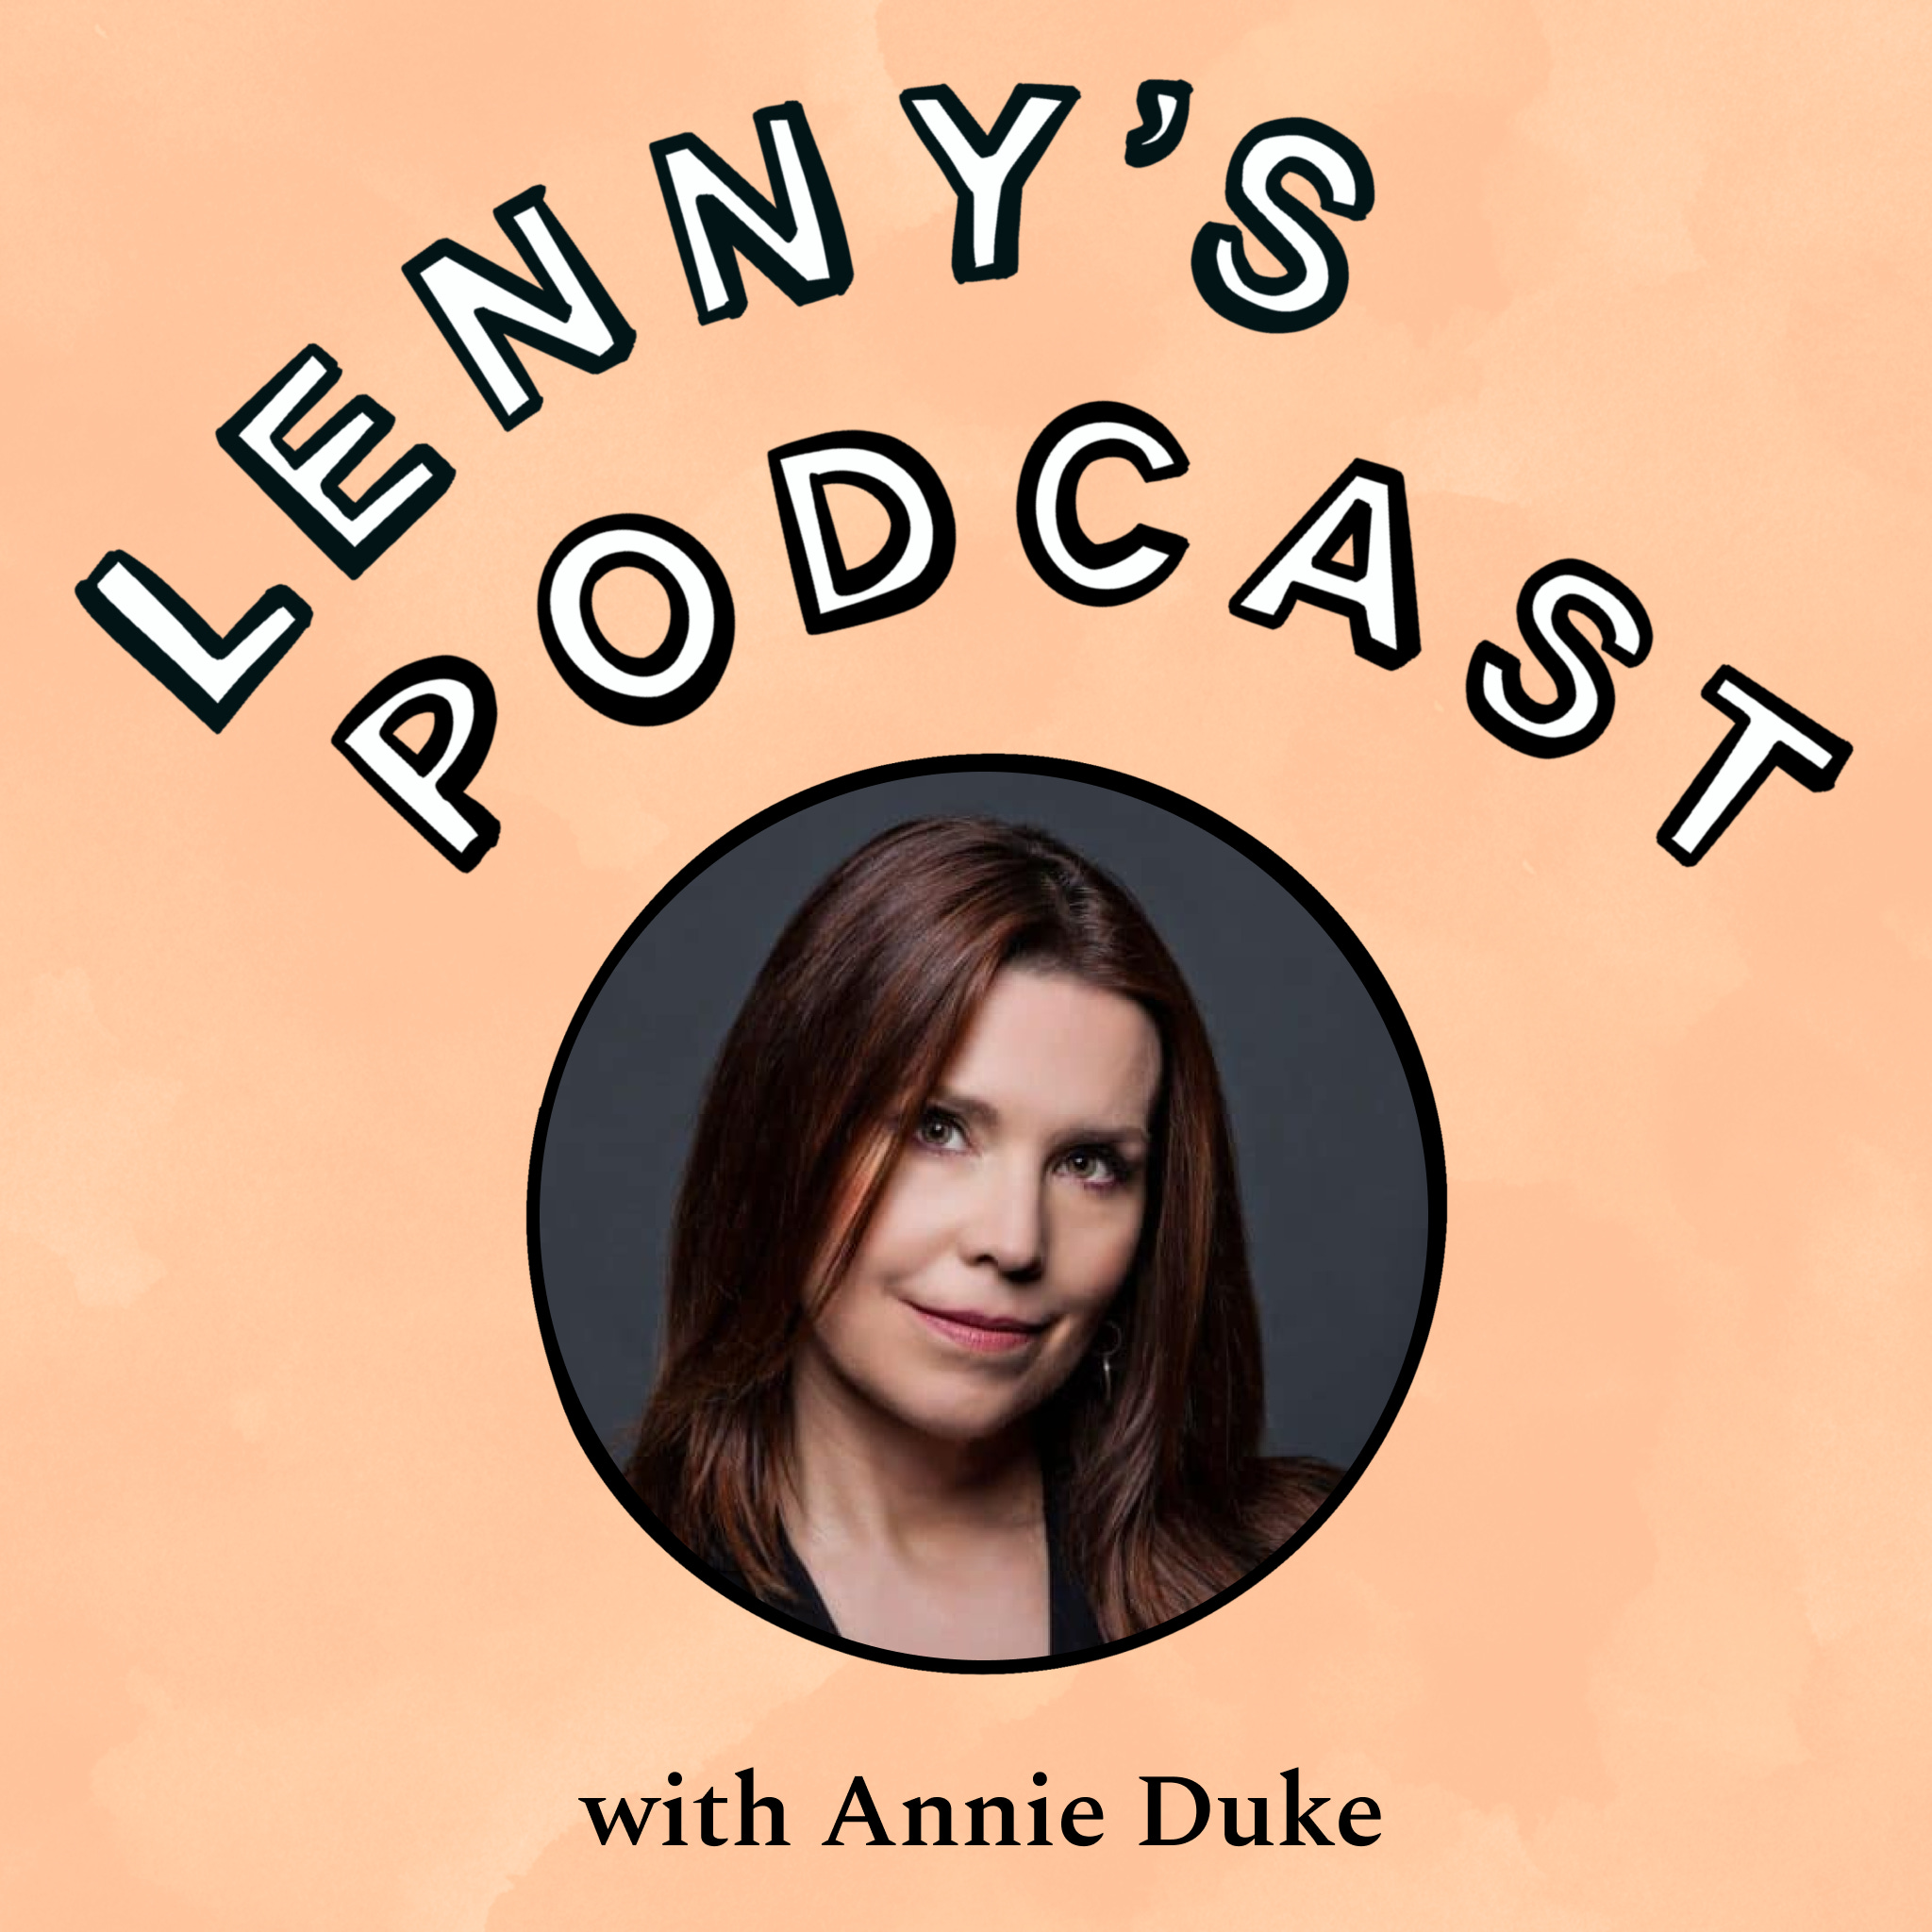 This will make you a better decision maker | Annie Duke (author of “Thinking in Bets” and “Quit”, former pro poker player)